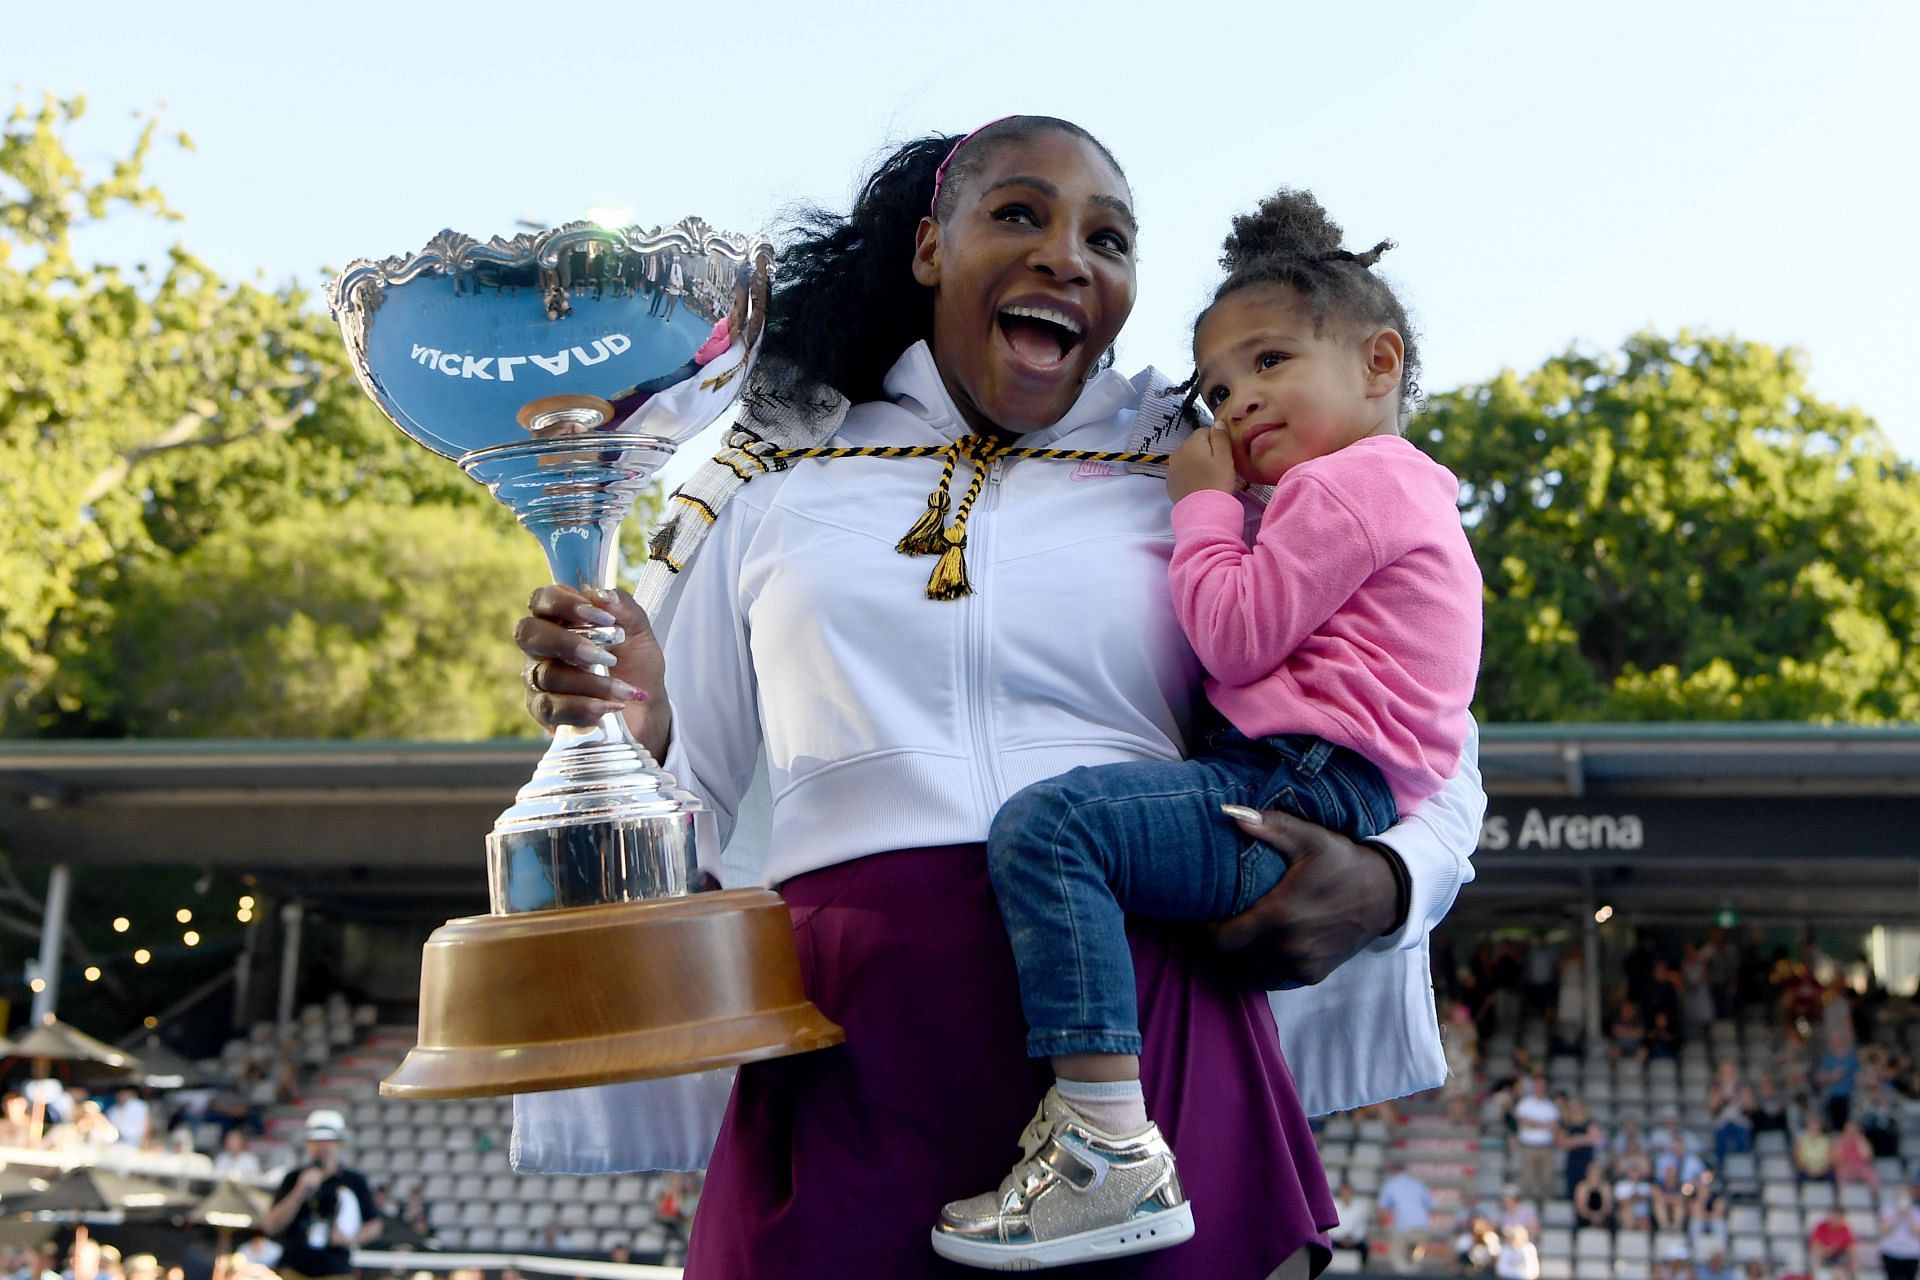 Serena Williams revealed that she wanted to have more kids in the future